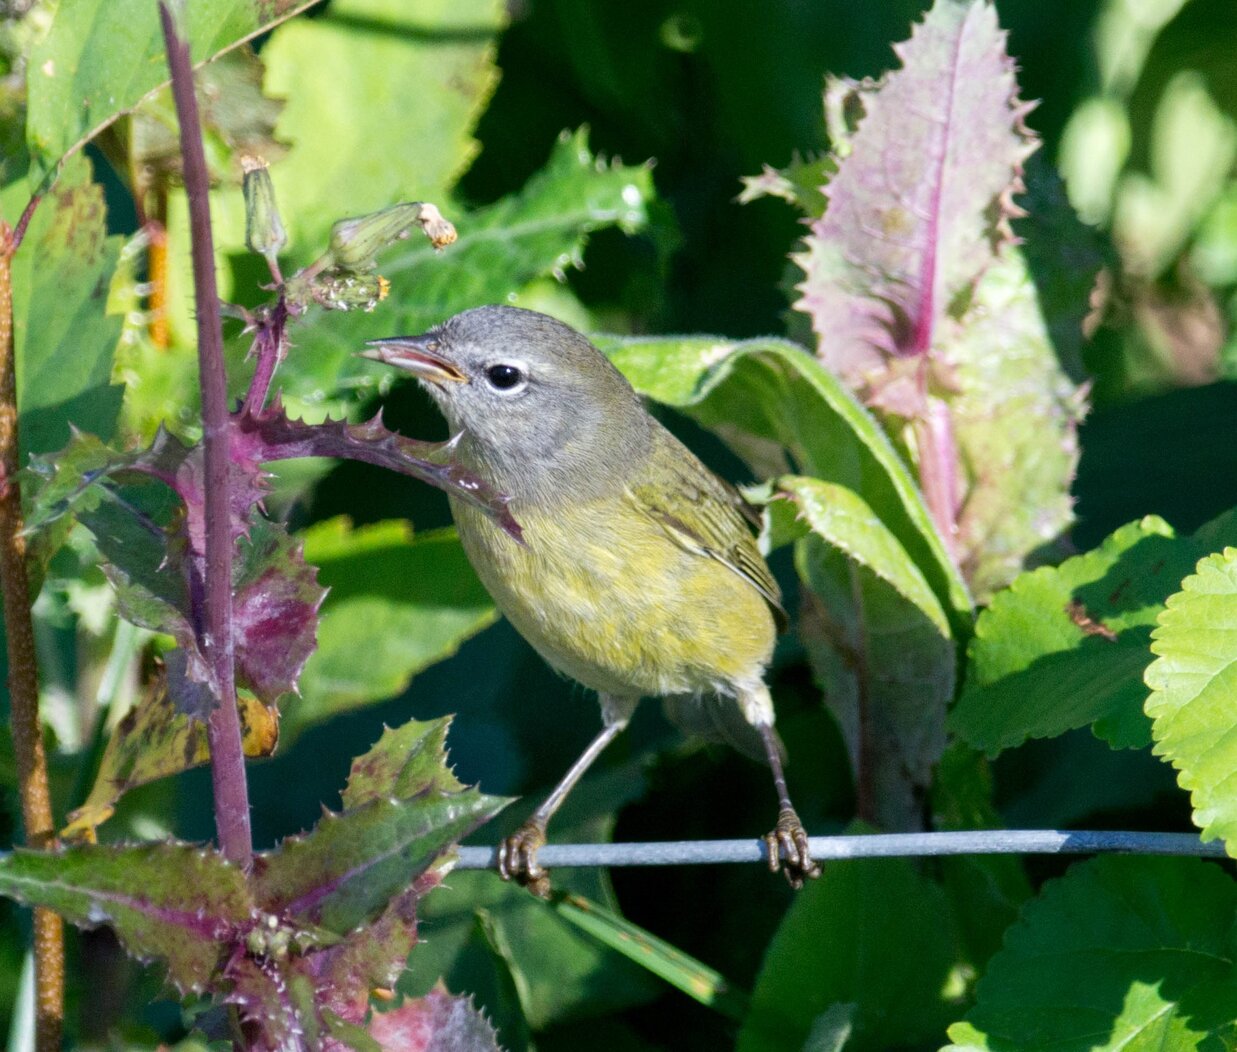 An Orange-crowned Warbler feeds in the gardens of Brooklyn Bridge Park. Photo: Will Pollard/CC BY-ND 2.0